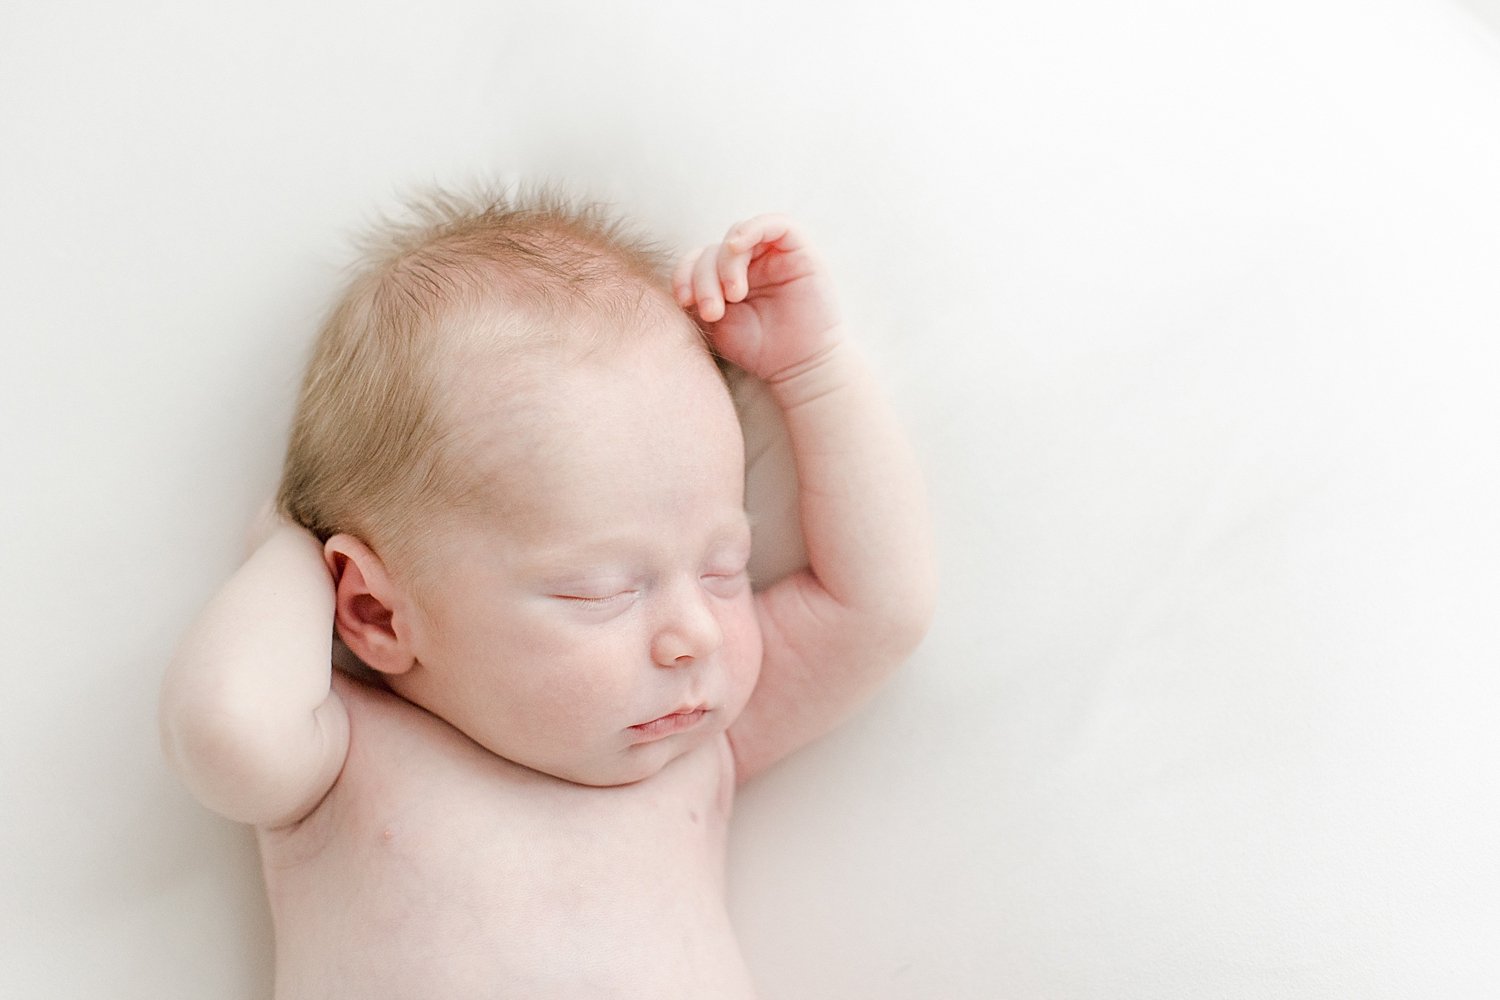 Newborn snuggled up with arms by his face | Kristin Wood Photography